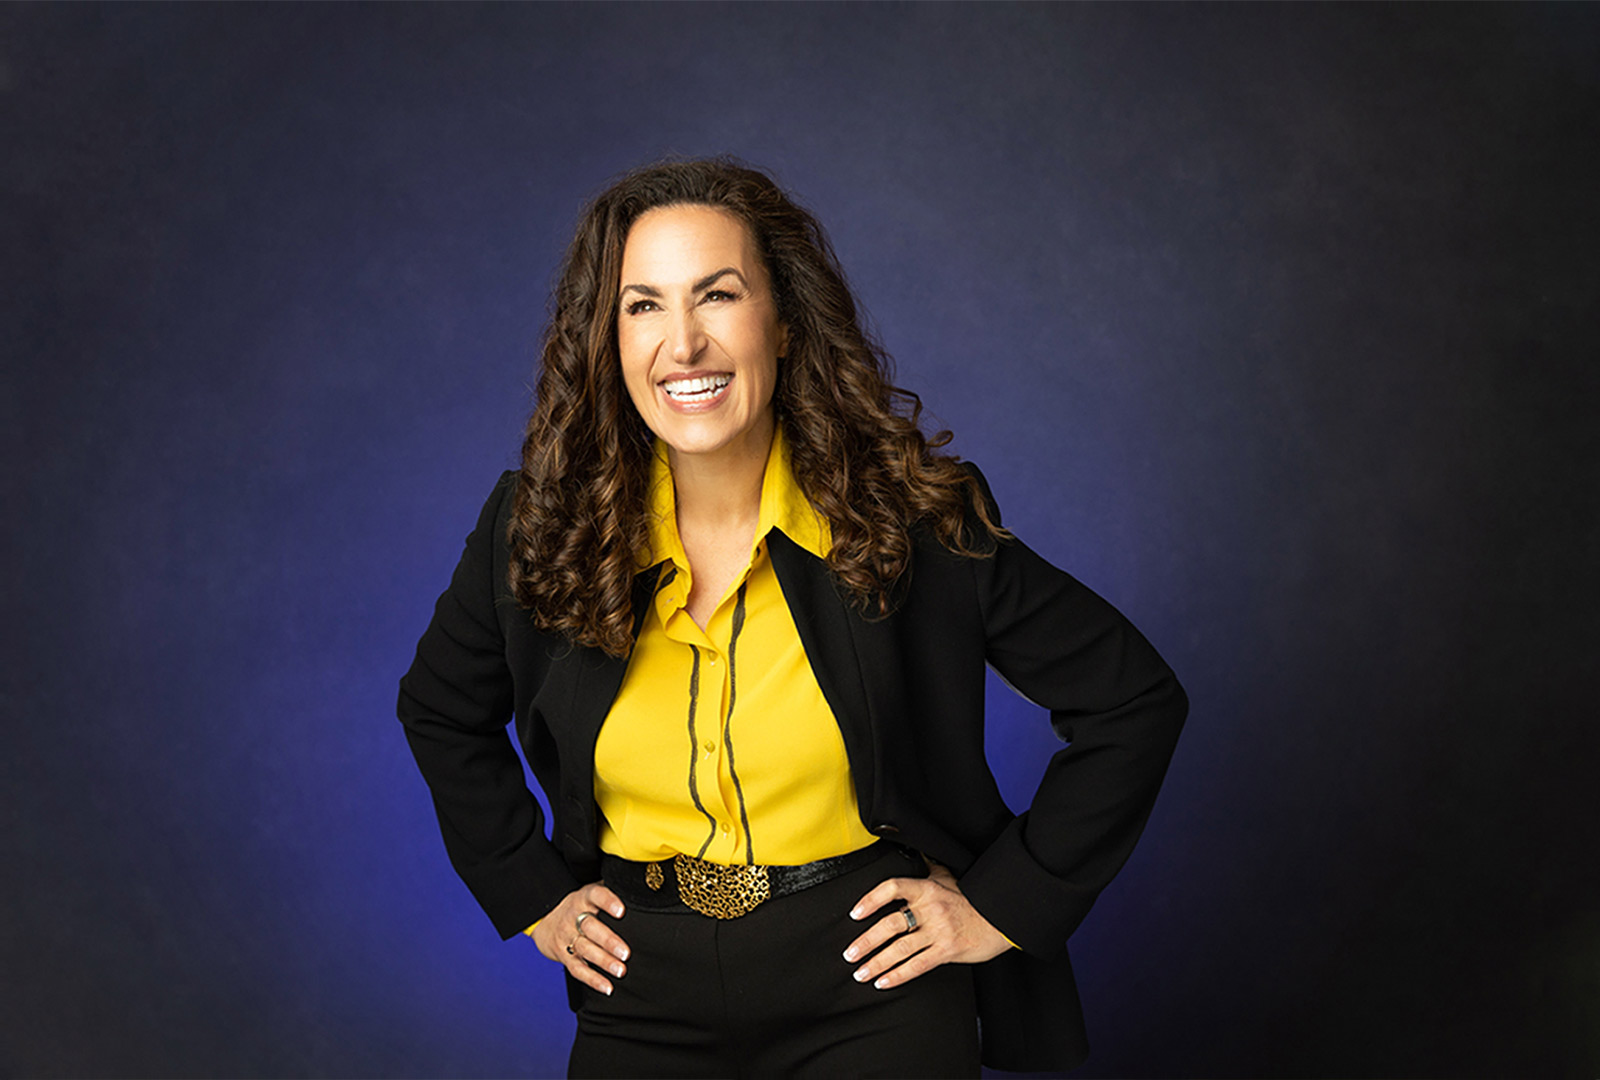 Business branding photo of a female entrepreneur smiling with her hands on her hips in a business suit